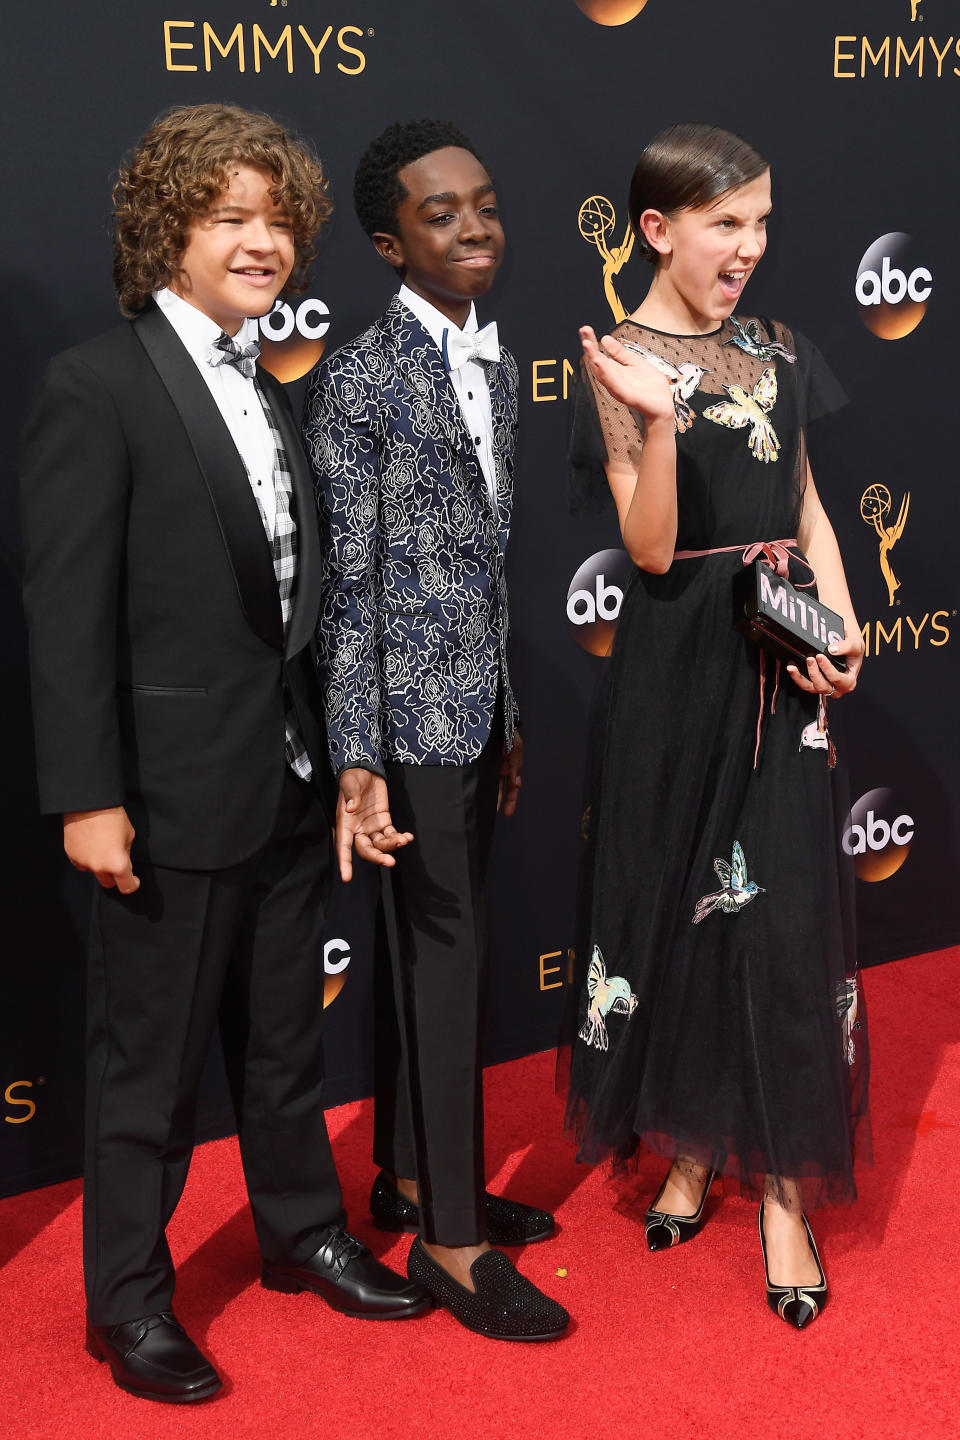 LOS ANGELES, CA - SEPTEMBER 18:  (L-R) Actors Gaten Matarazzo, Caleb McLaughlin and Millie Bobby Brown attend the 68th Annual Primetime Emmy Awards at Microsoft Theater on September 18, 2016 in Los Angeles, California.  (Photo by Frazer Harrison/Getty Images)